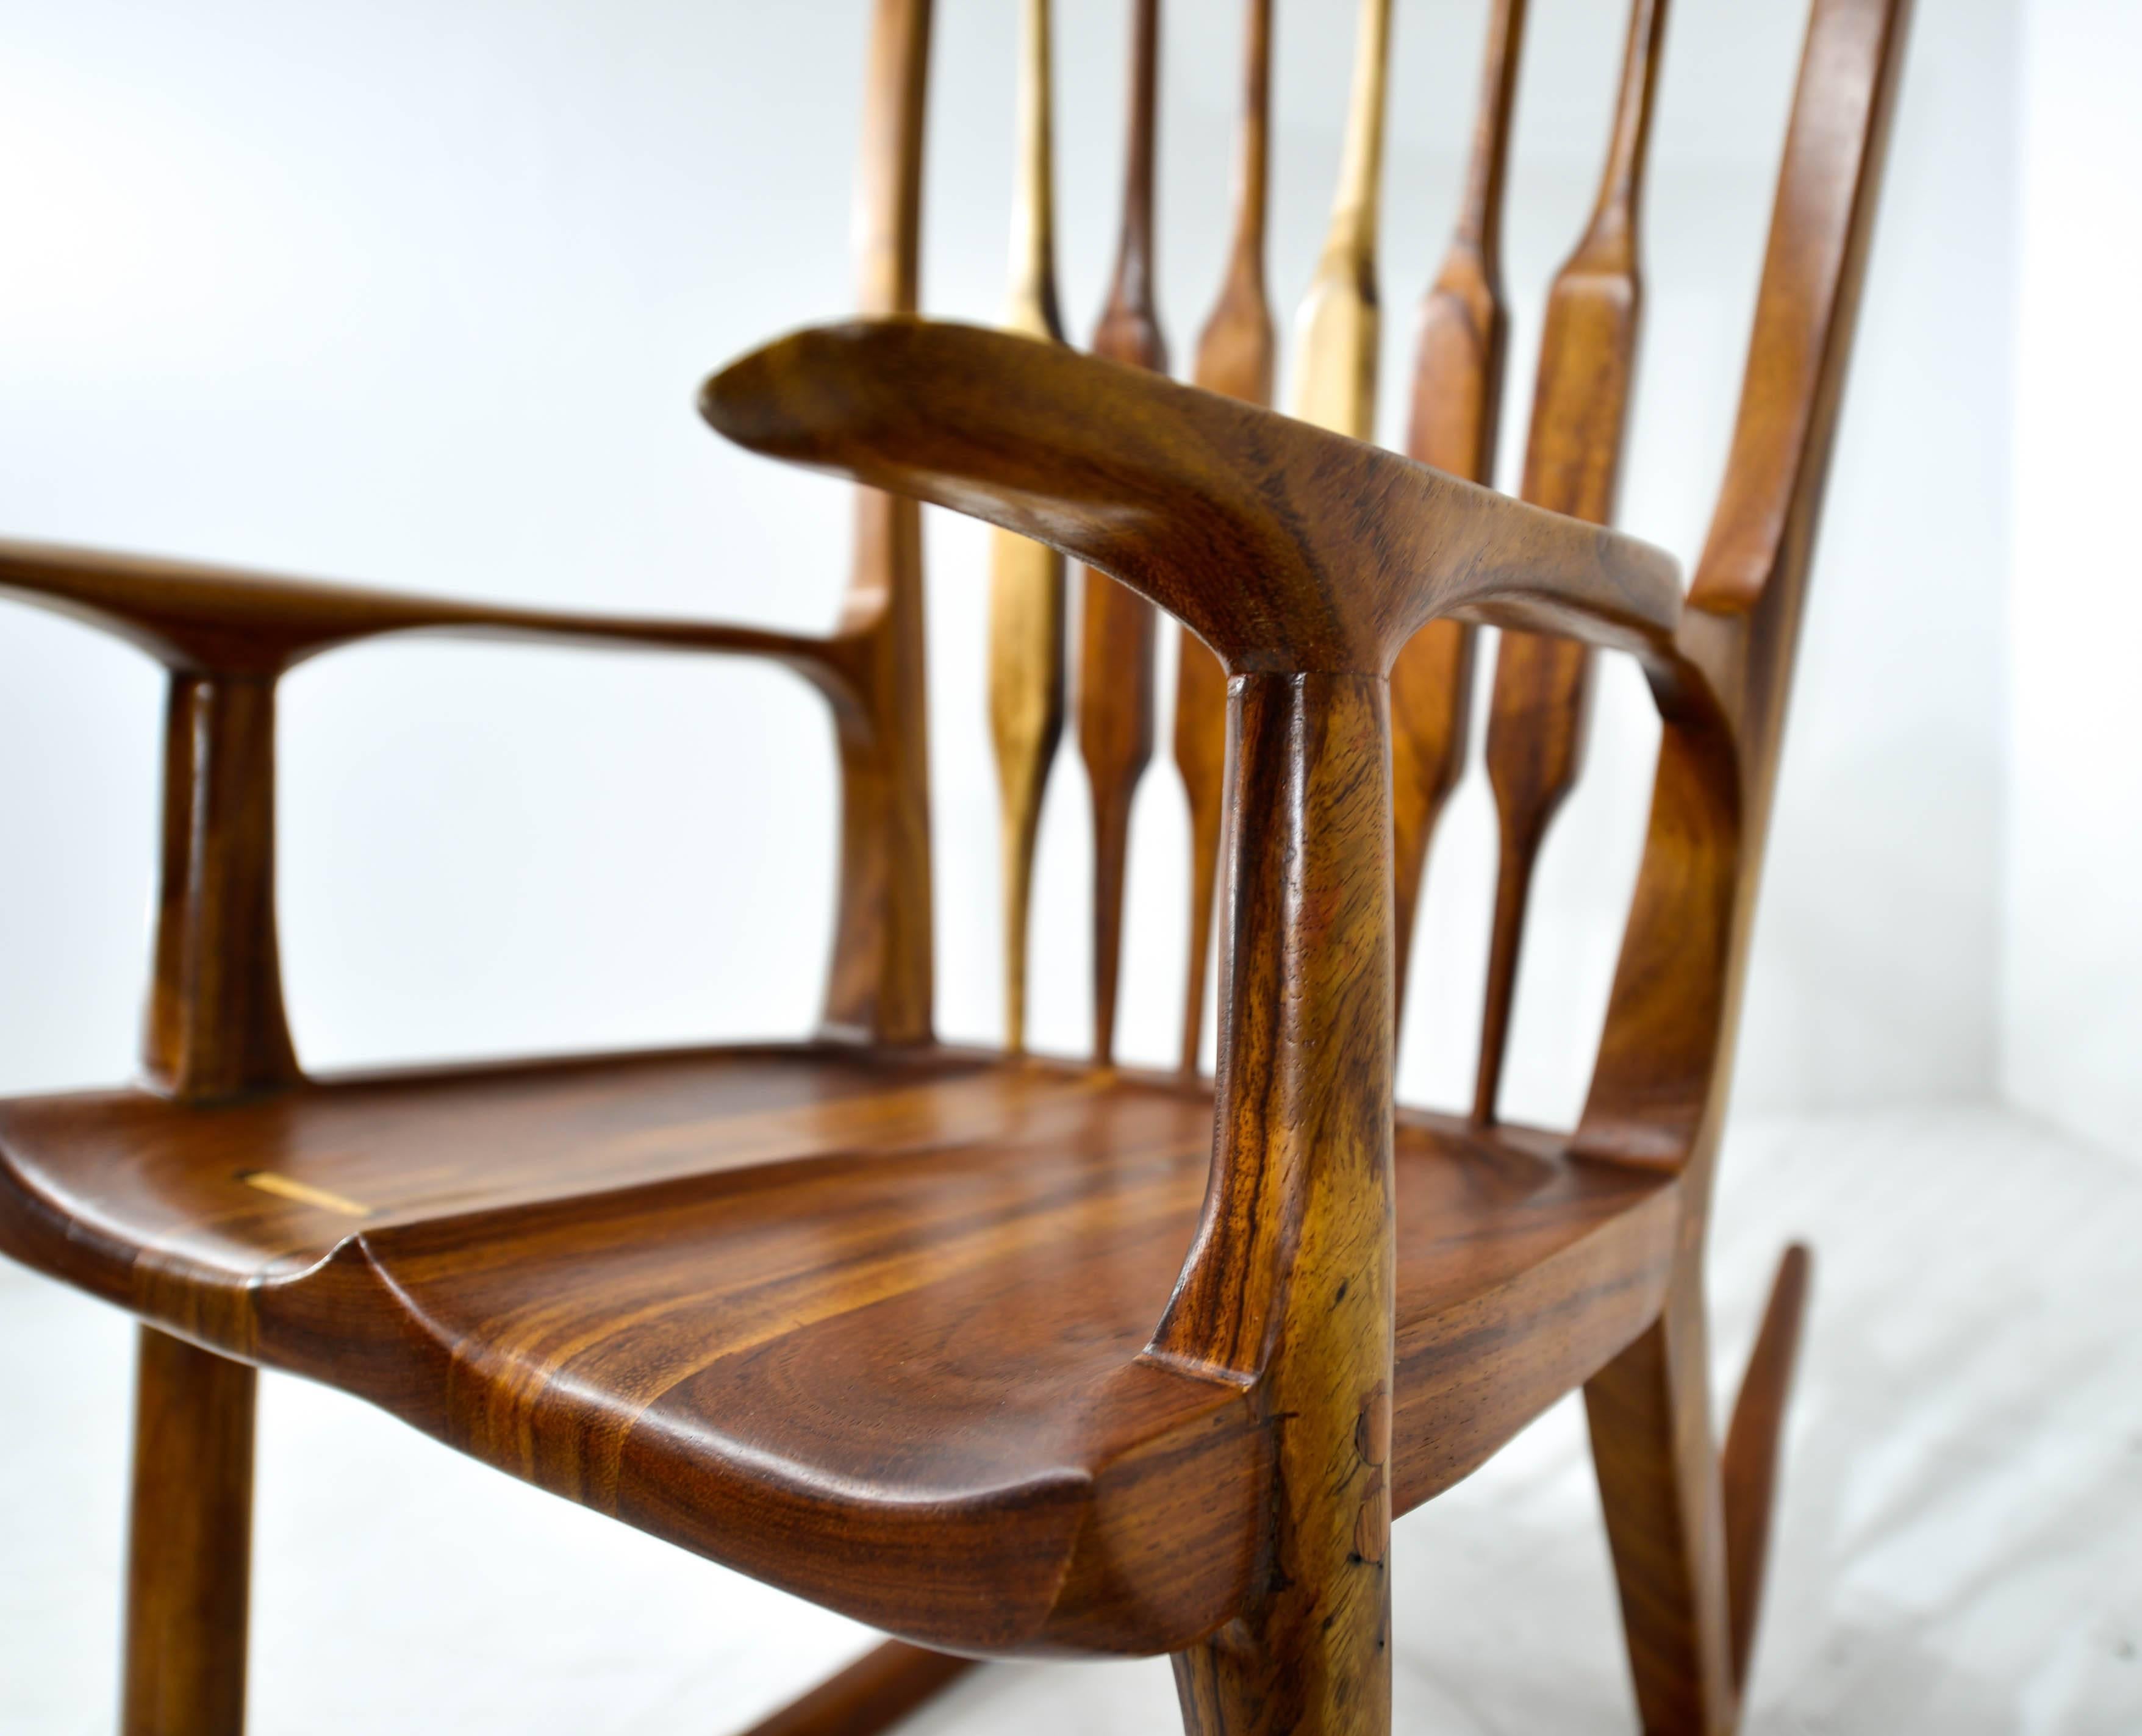 Rocking Chair, In The Manner of Sam Maloof

Period: 1960-1969